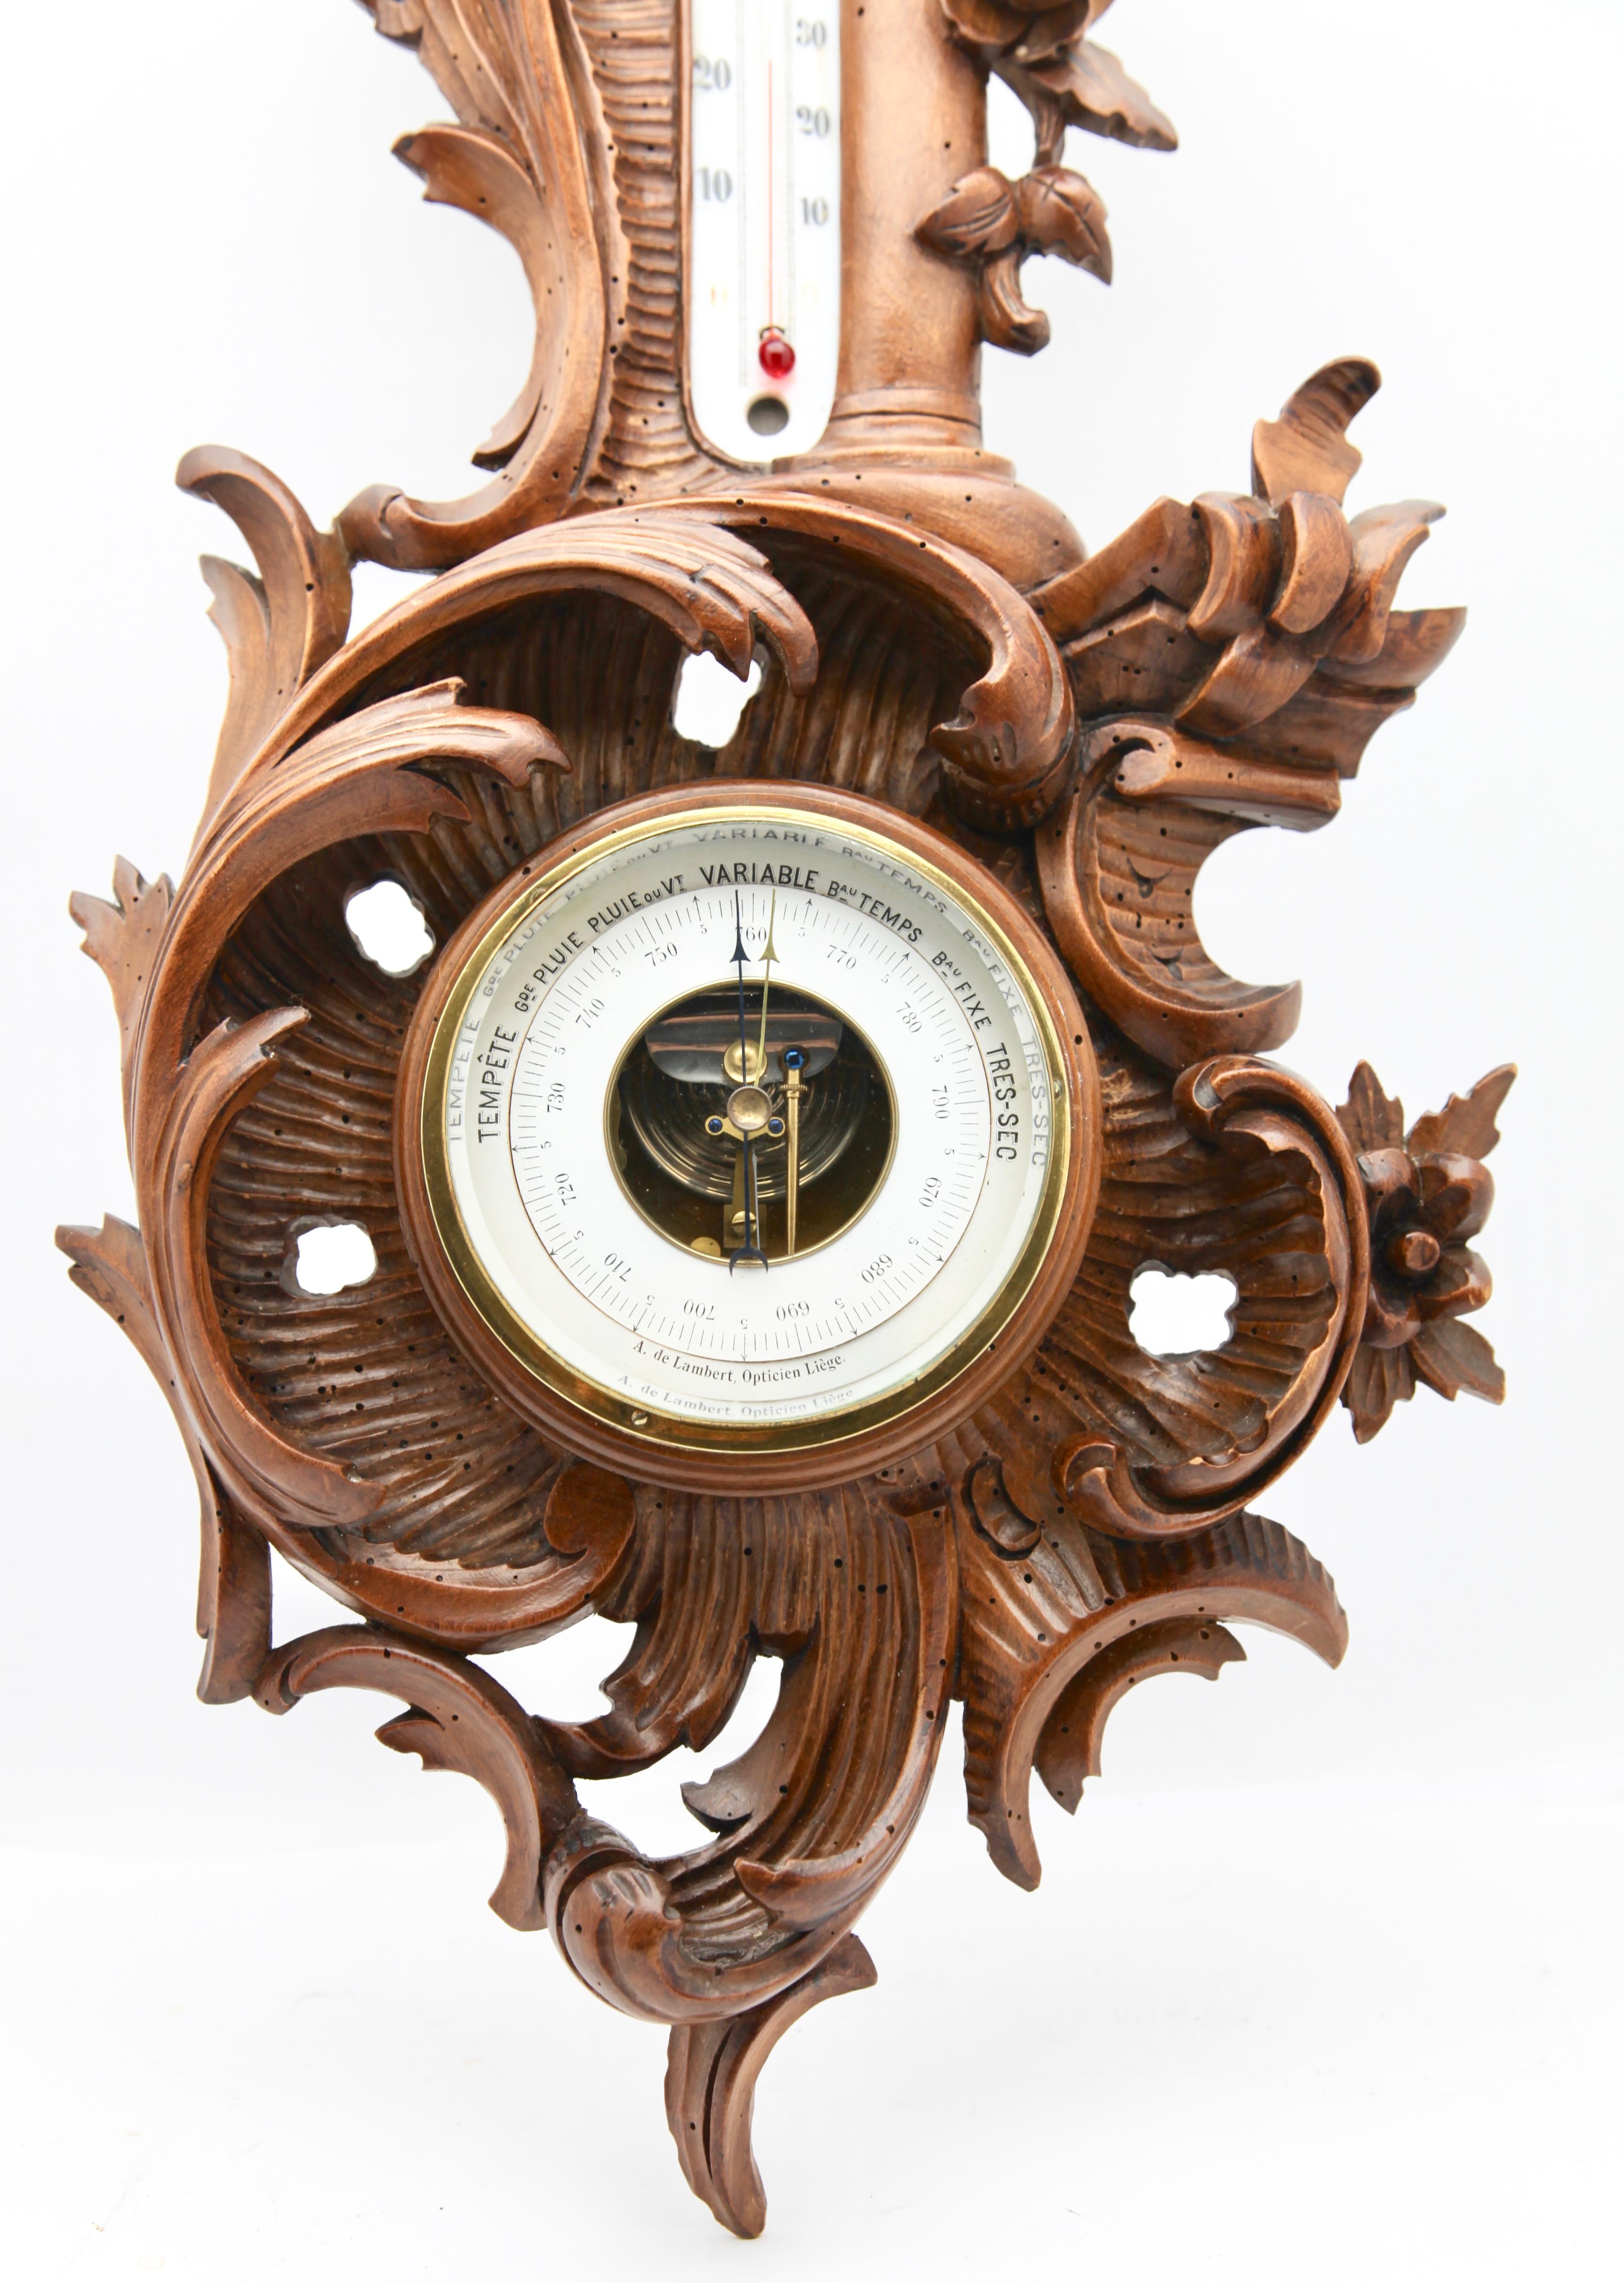 Wall-mounted weather station in carved walnut made in Belgium by A. de Lambert. High quality mechanism with jeweled movement barometer and thermometer (in centigrade)
Unusual design with high relief C-scrolls and flowers in Rococo style (from the